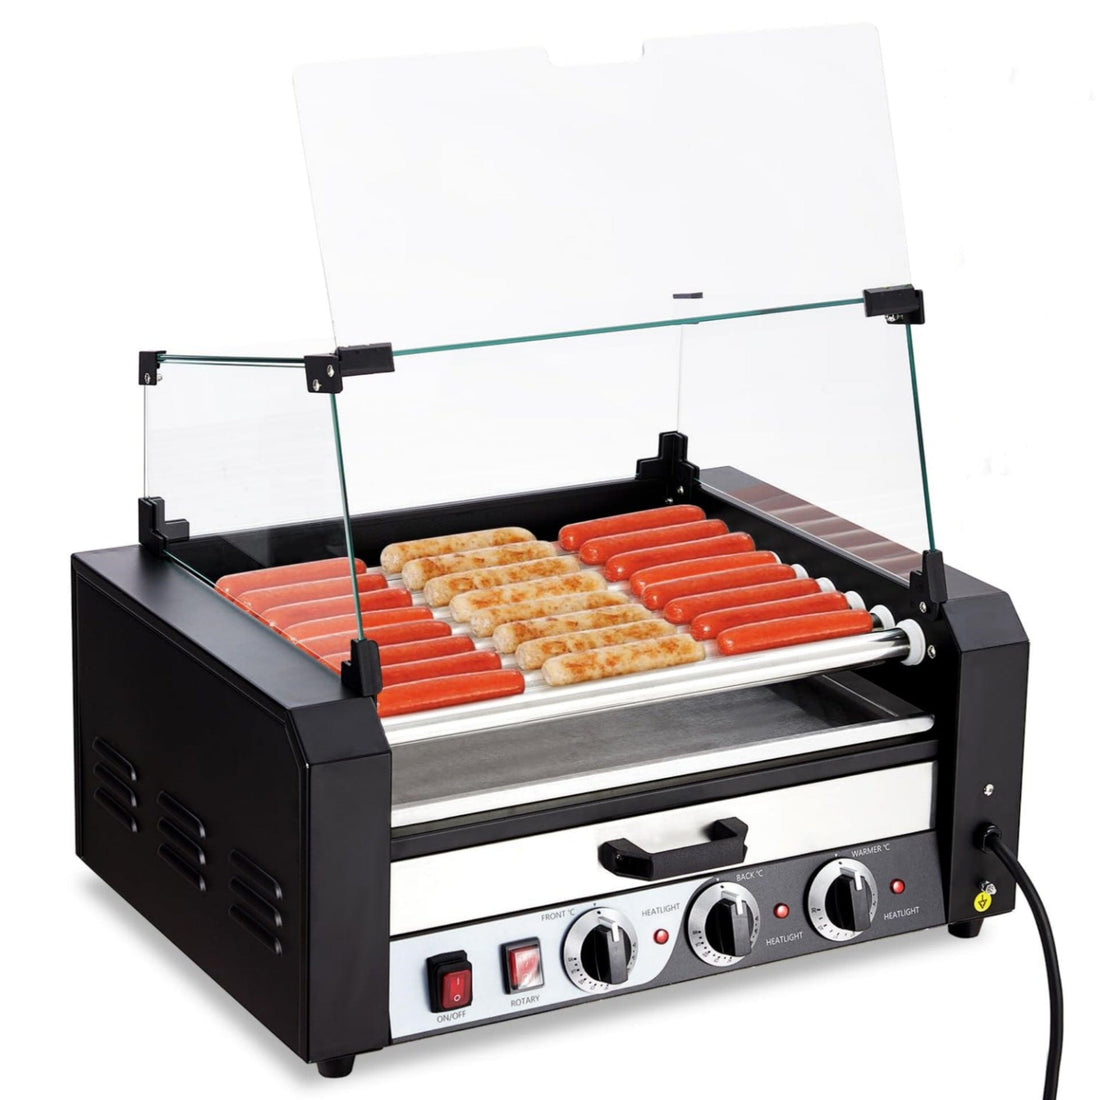 1650W Hot Dog Roller 9 Rollers, 24 Capacity with Dual Temp